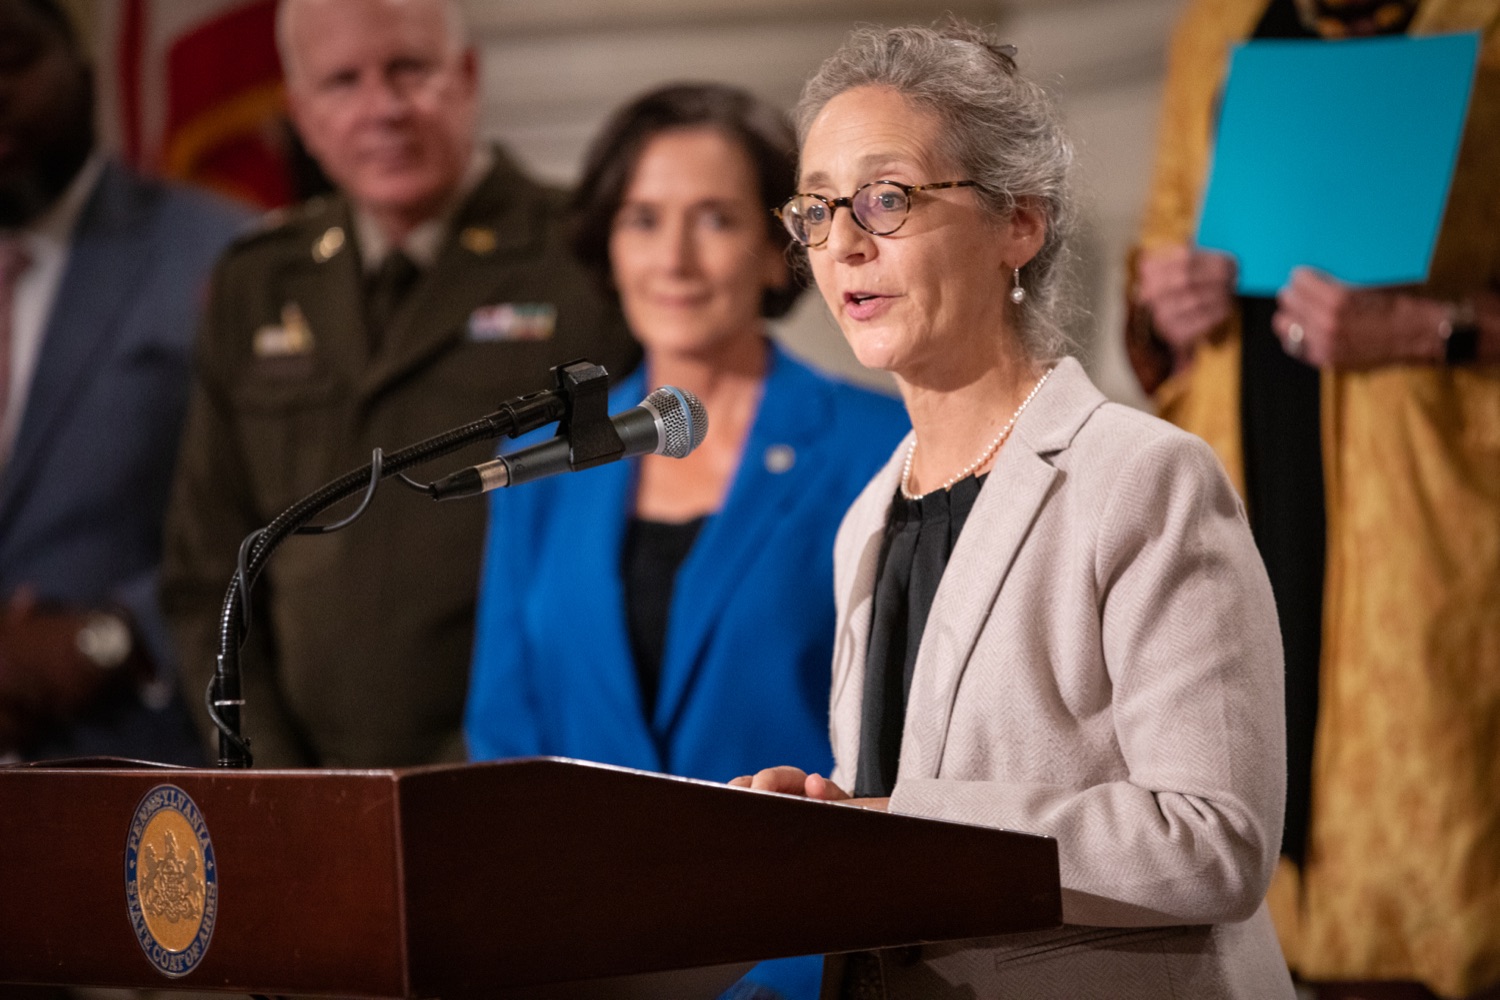 Department of Health Acting Secretary, Dr. Debra Bogen, speaks at Pennsylvanias Suicide Prevention Month Press Conference at the State Capital in Harrisburg, PA.<br><a href="https://filesource.amperwave.net/commonwealthofpa/photo/23696_dhs_suicidePrevention-11.jpg" target="_blank">⇣ Download Photo</a>